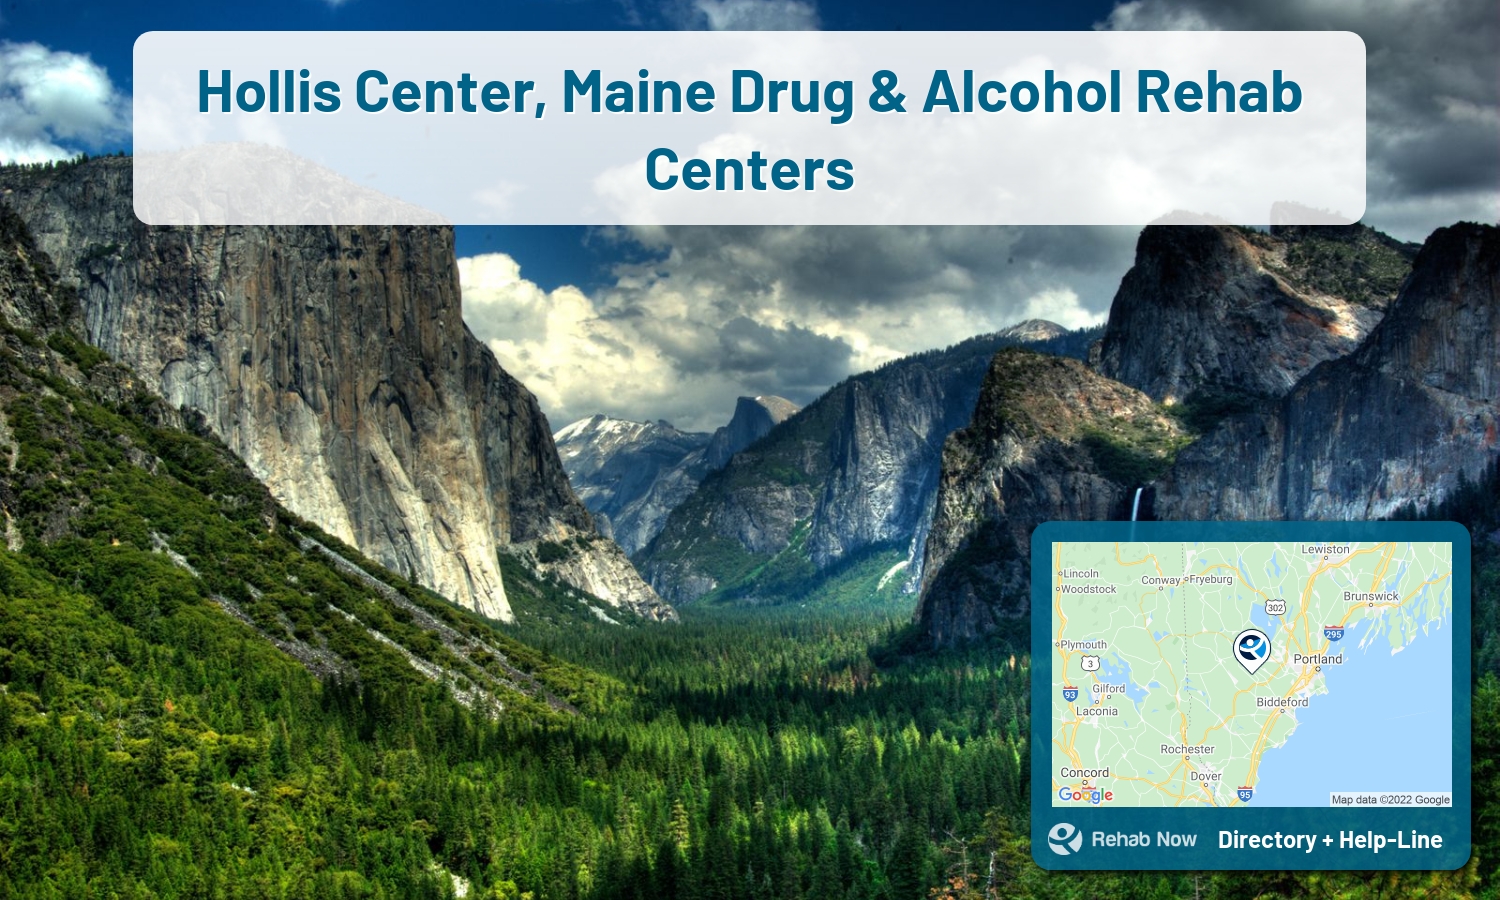 Find drug rehab and alcohol treatment services in Hollis Center. Our experts help you find a center in Hollis Center, Maine